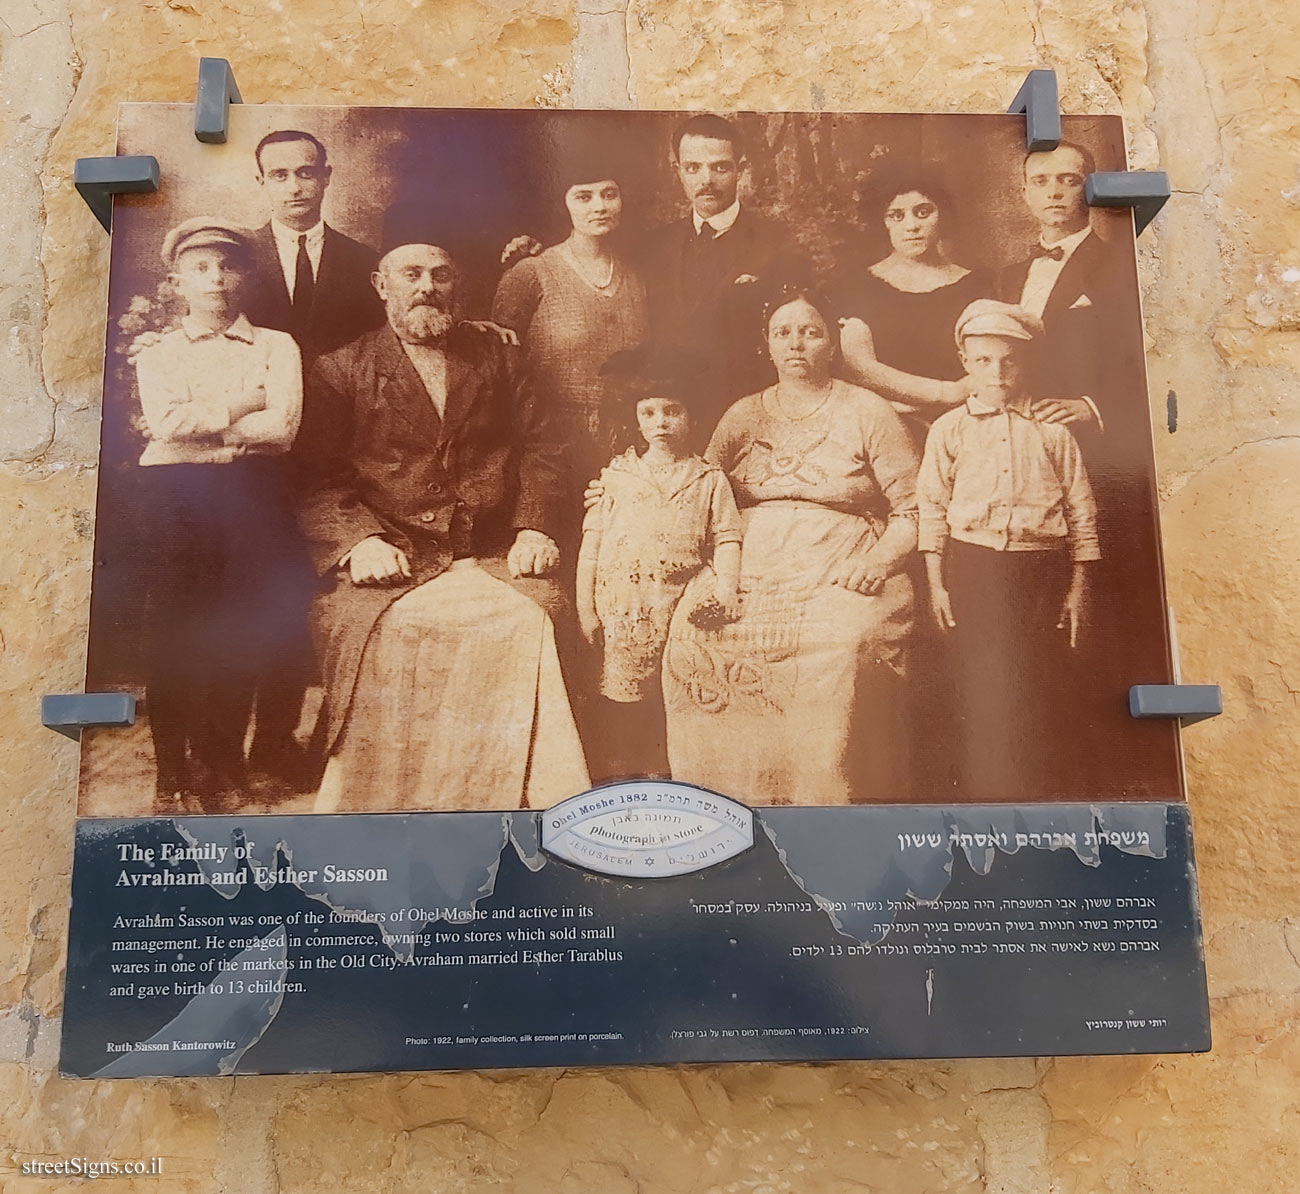 Jerusalem - Photograph in stone - The Family of Avraham and Esther Sasson